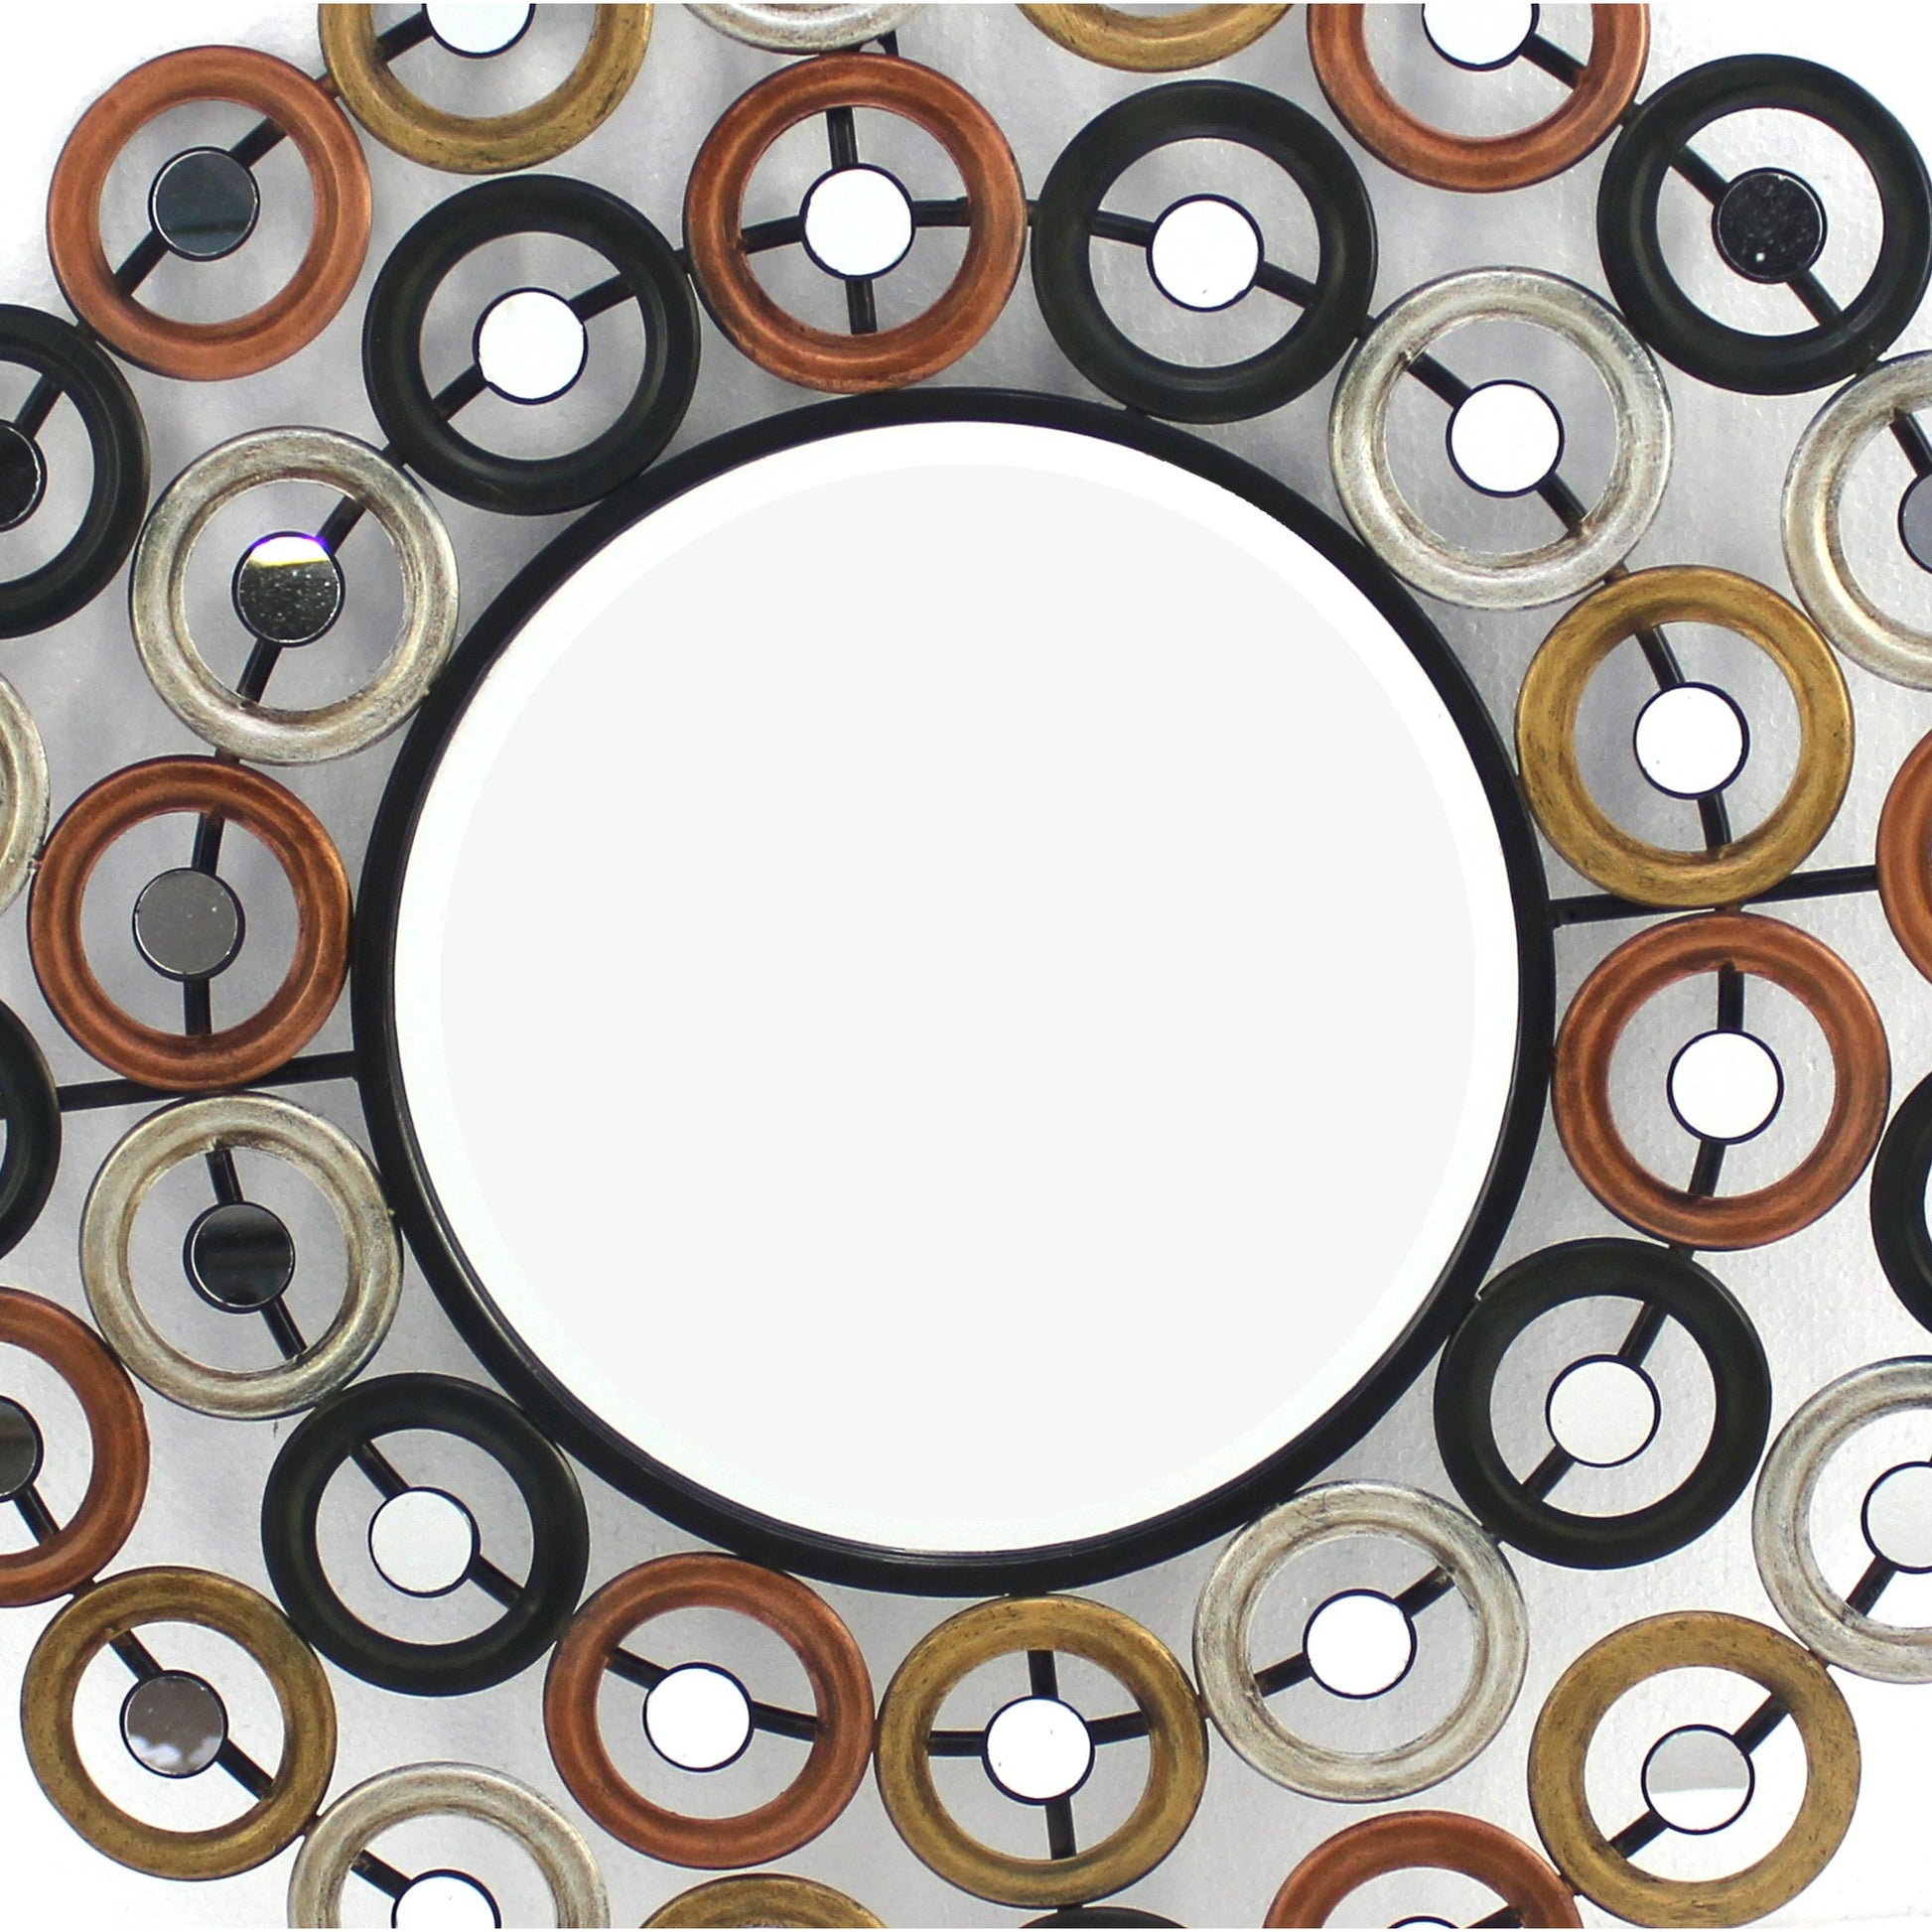 Benzara Multicolor Round Wall Mirror Surrounded by Smaller Round Mirrors